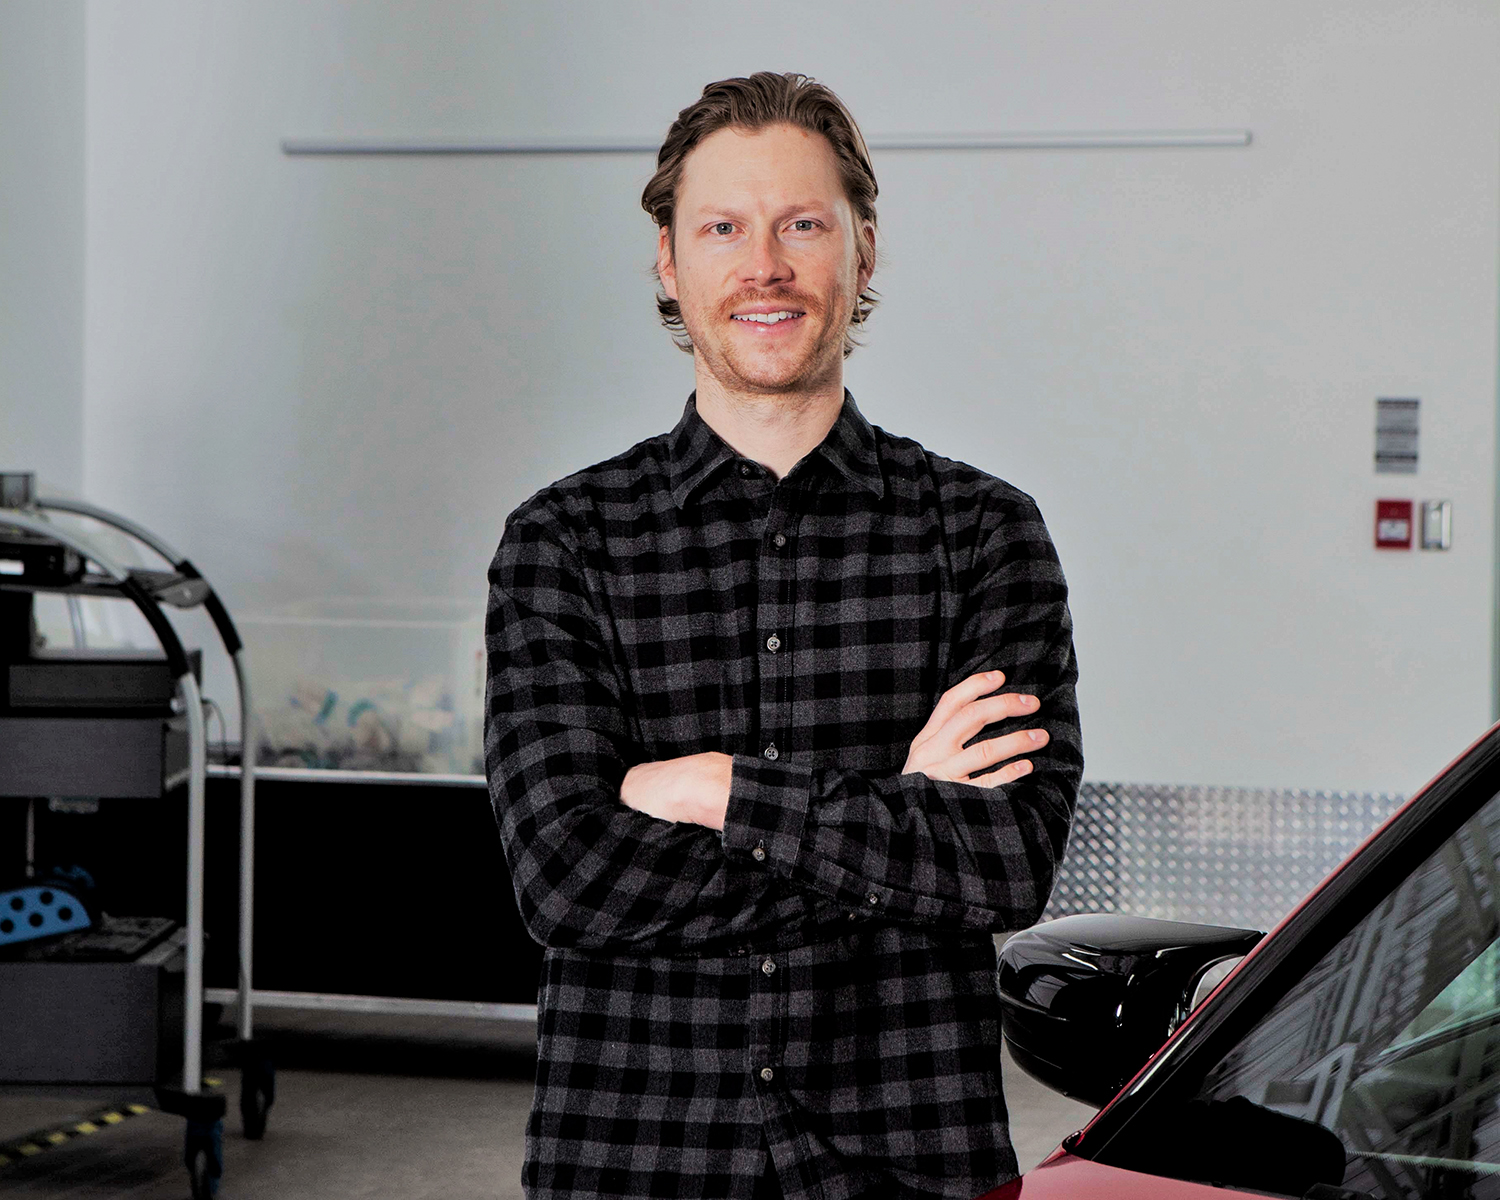 The image shows Alex Welsh, a Motorrad Marketing Coordinator at the BMW Group Canada.